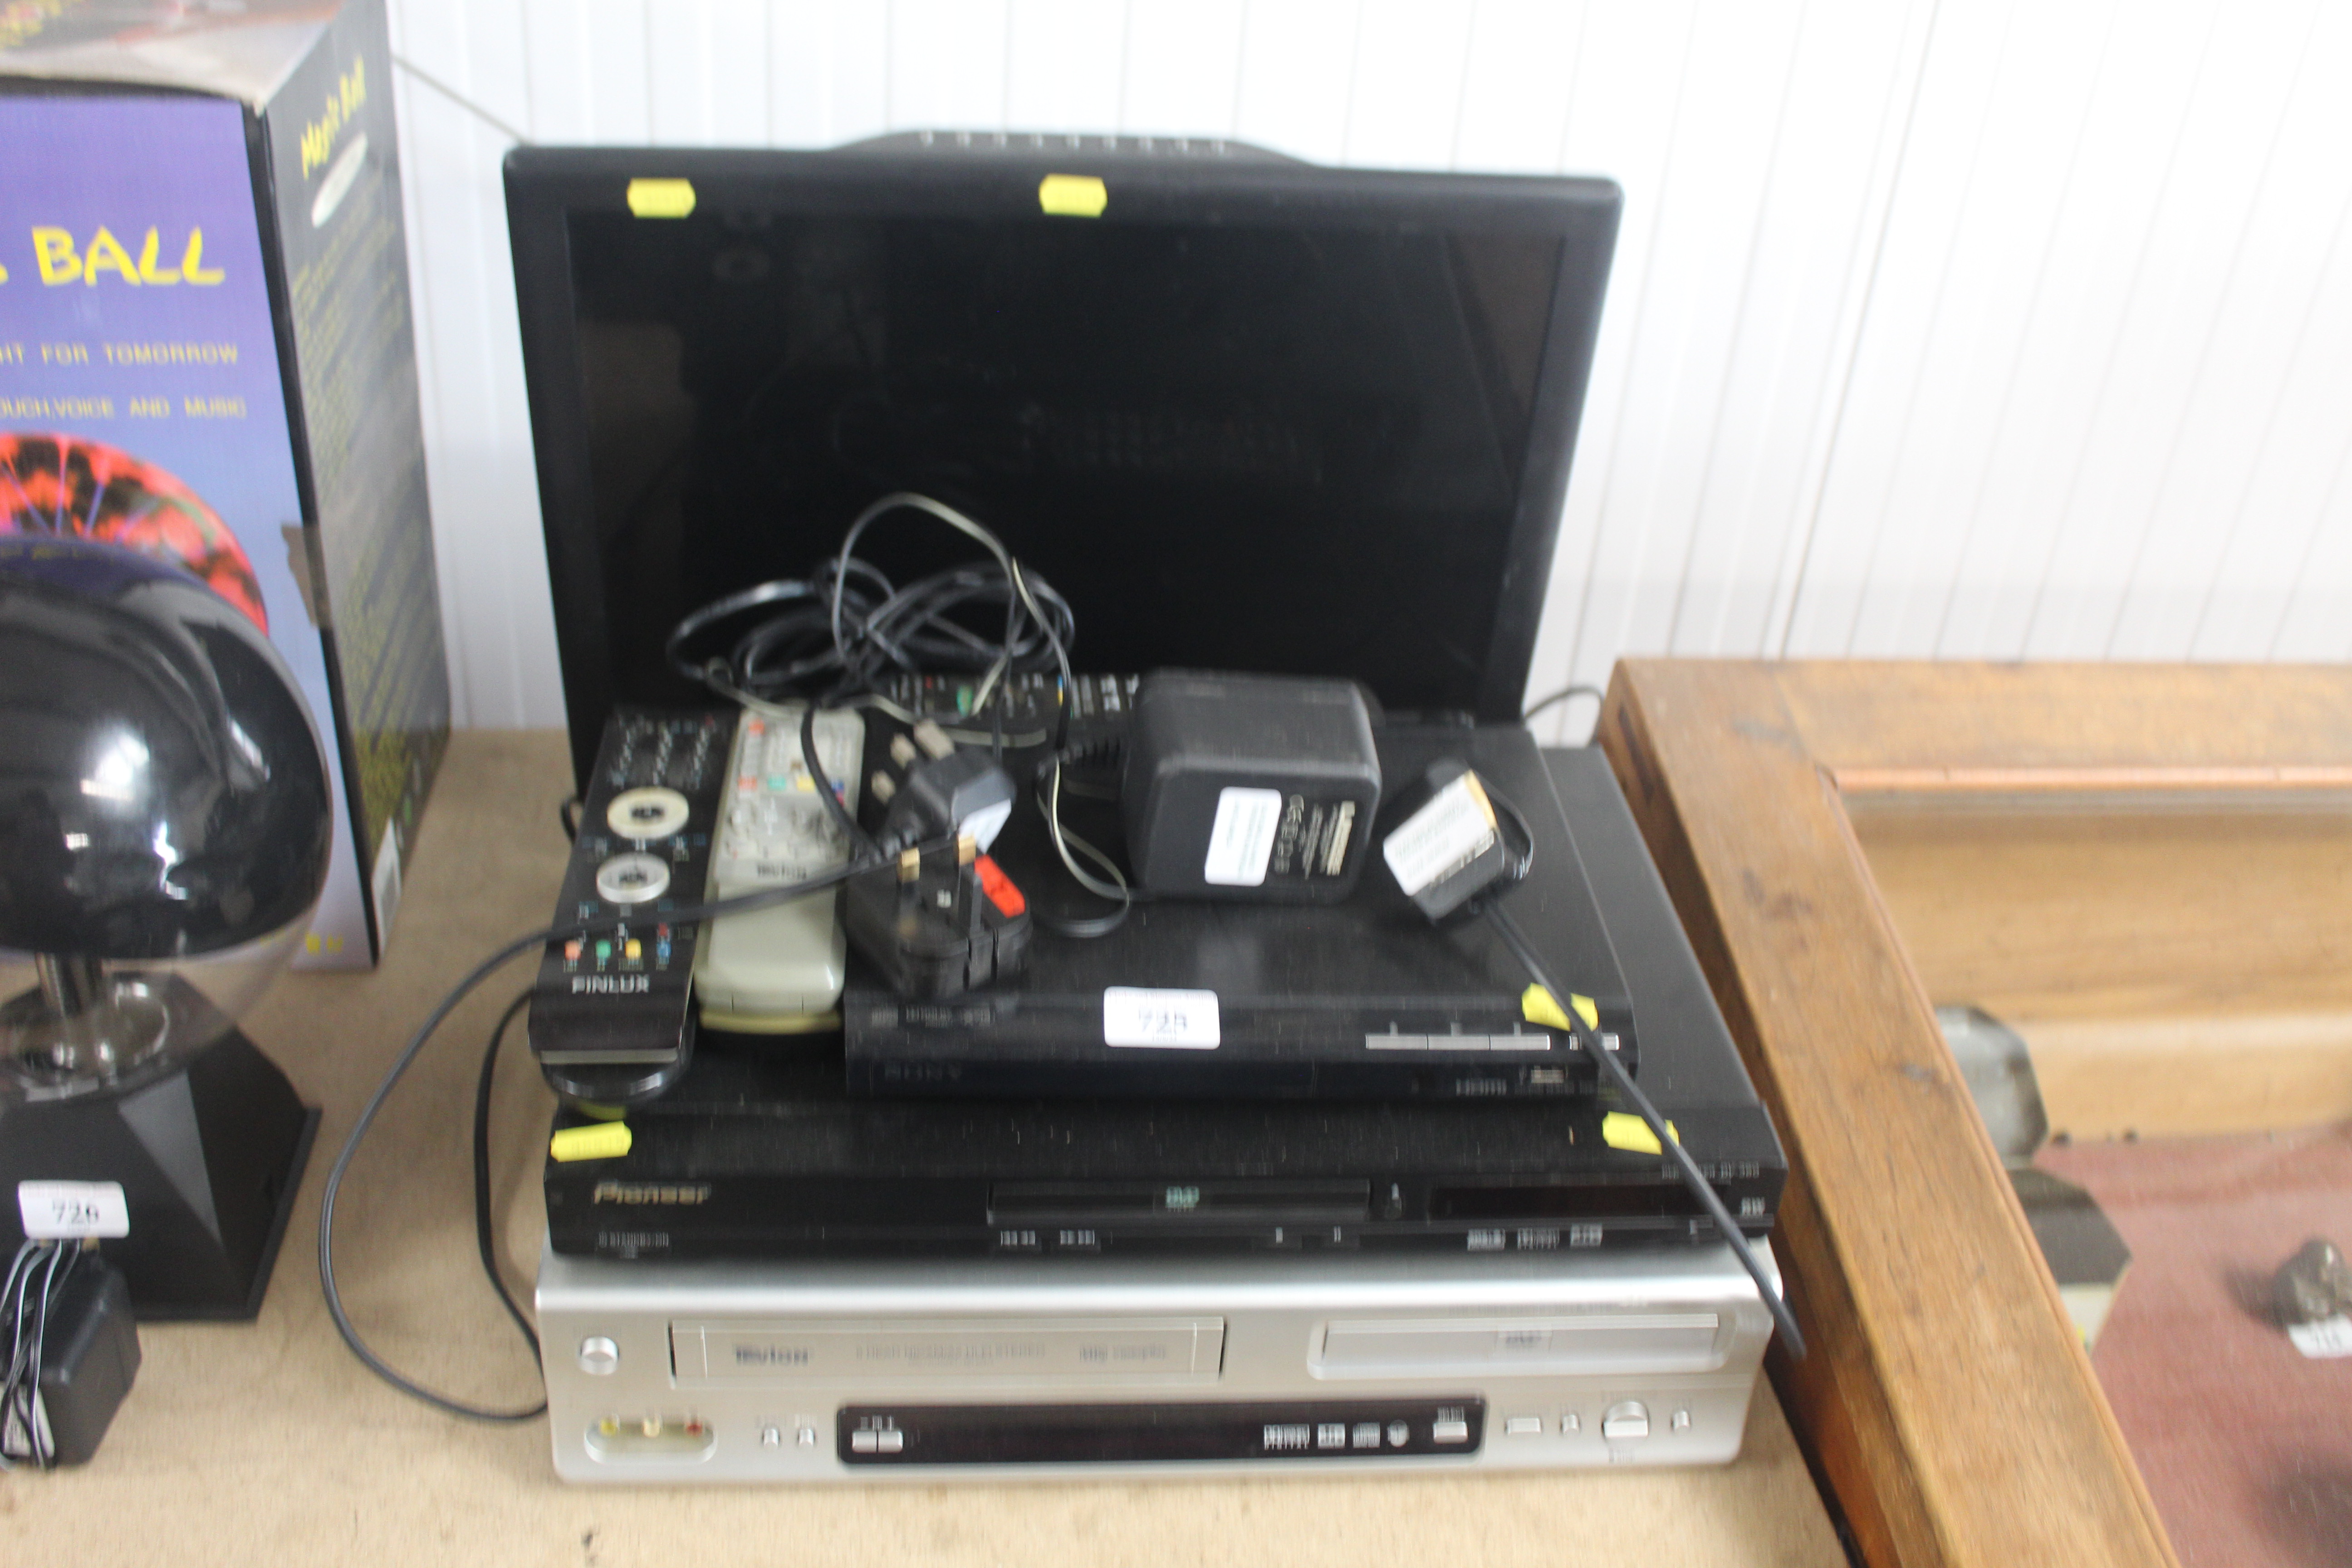 A Tevion television, a Sony DVD player, a Pioneer